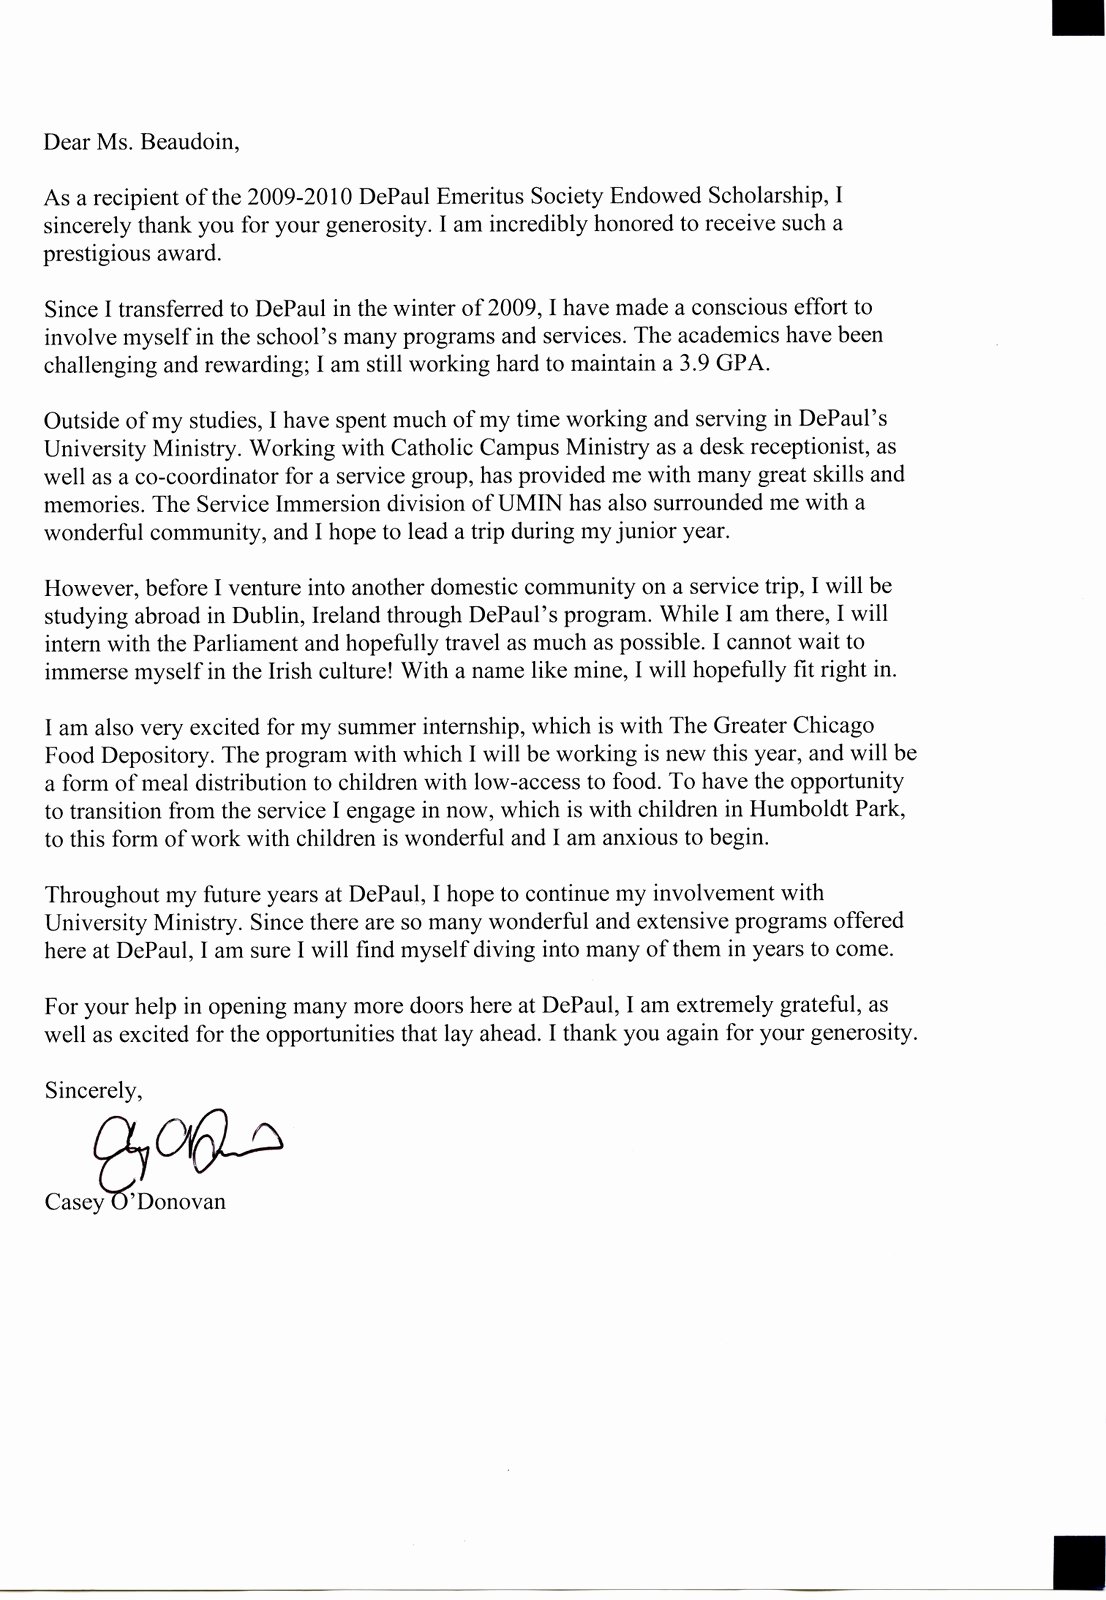 Scholarship Thank You Letter Lovely Des News Updates Depaul Emeritus society Chicago Il 2010 Des Scholarship Recipient